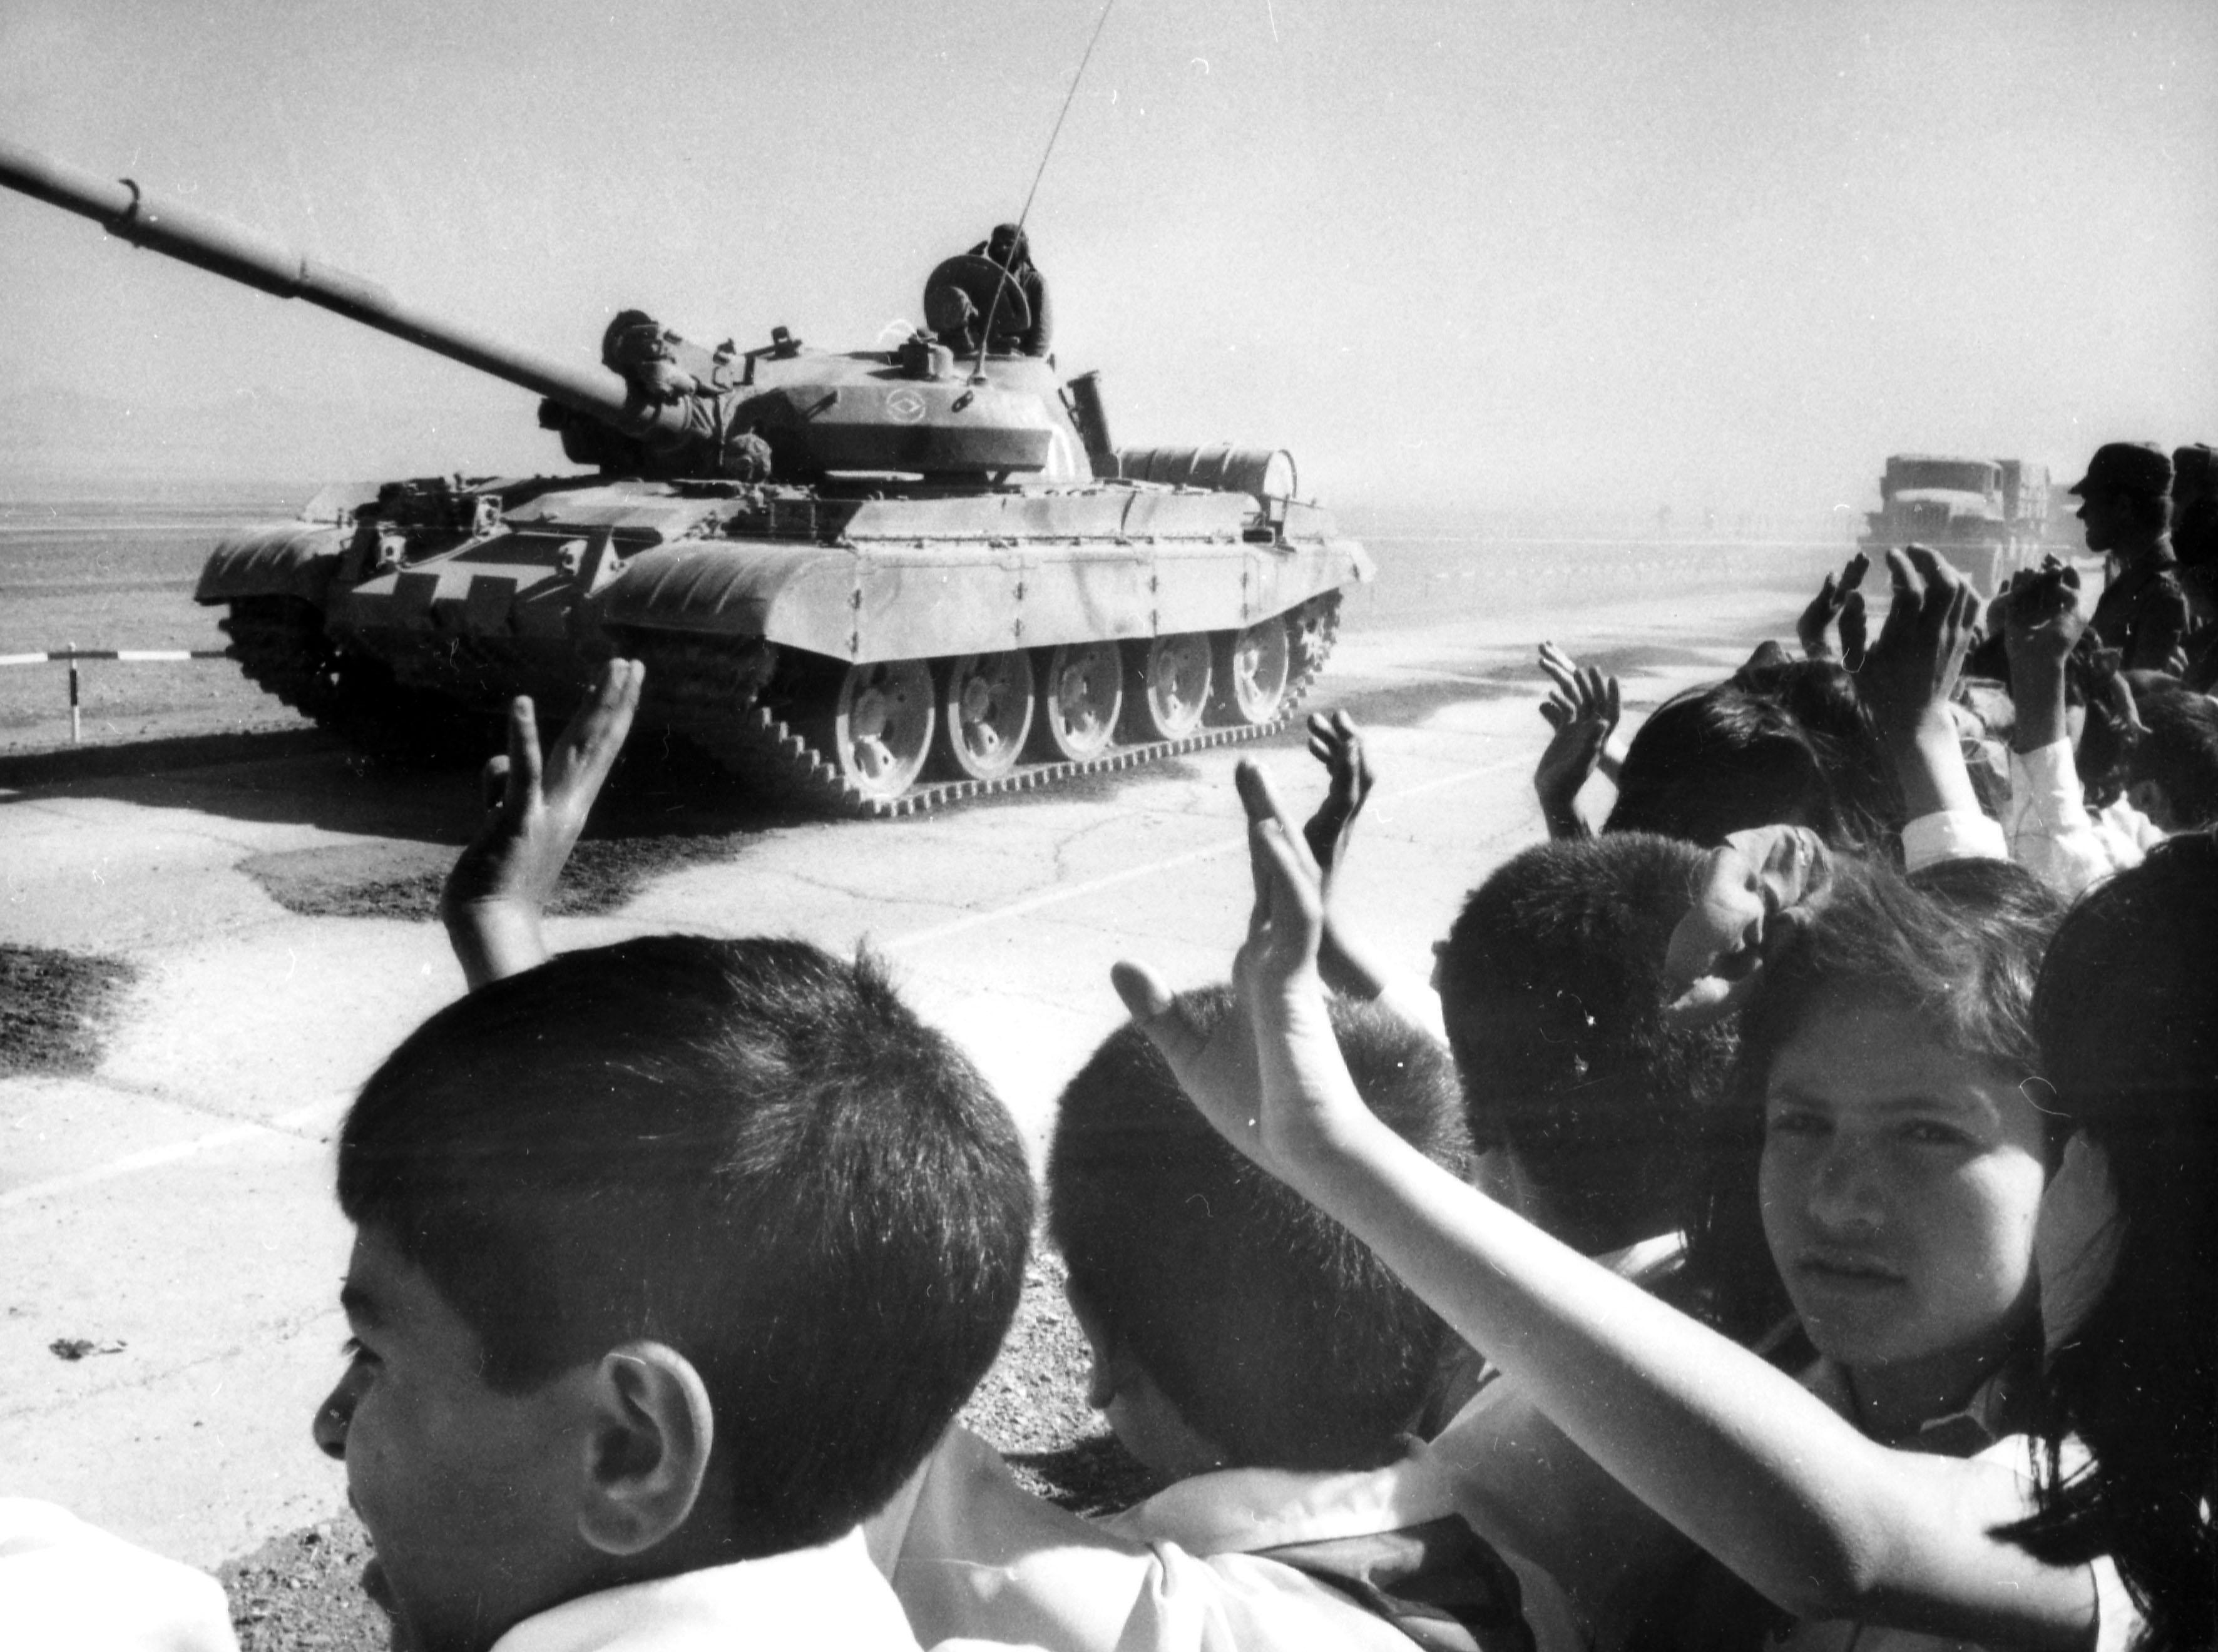 A Soviet battle tank leaving Afghanistan as part of the publicized withdrawal announced by Gorbachev, 1987